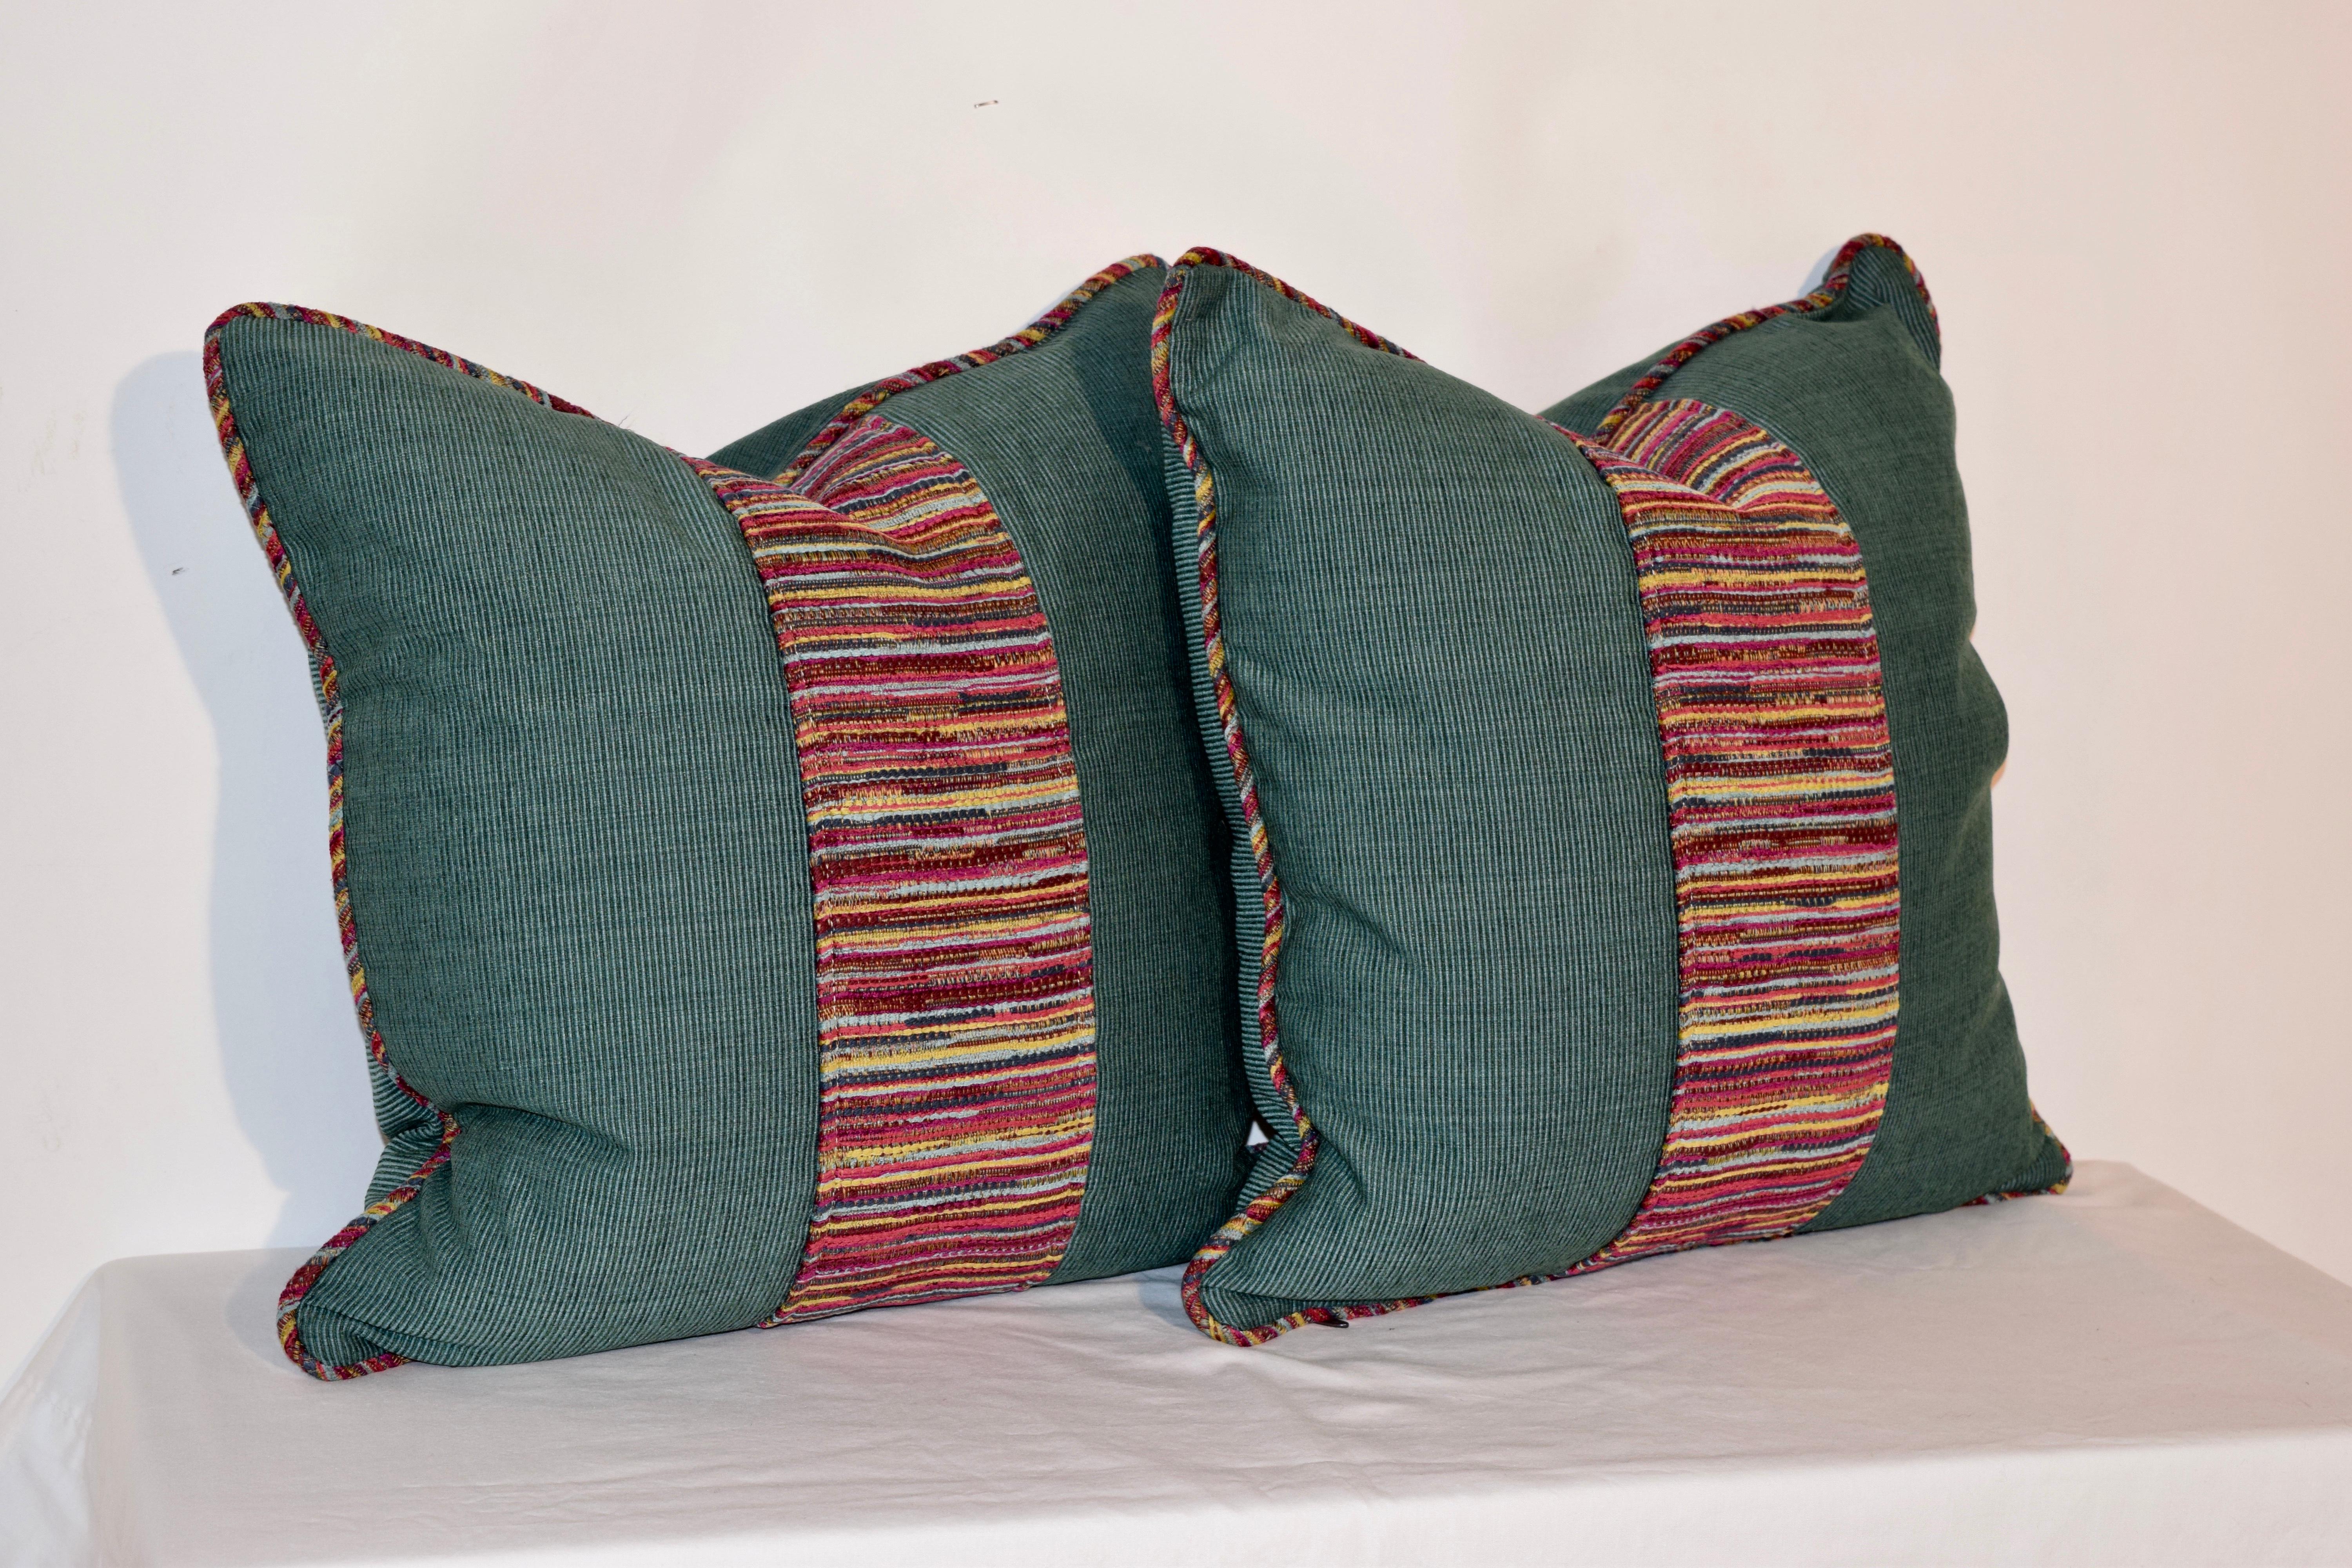 Handmade pillows with teal faille fabric and a central woven fabric stripe and matching welt. The back panels are solid teal faille fabric. The covers have hidden zippers and the feather inserts are removable. Dry clean only.